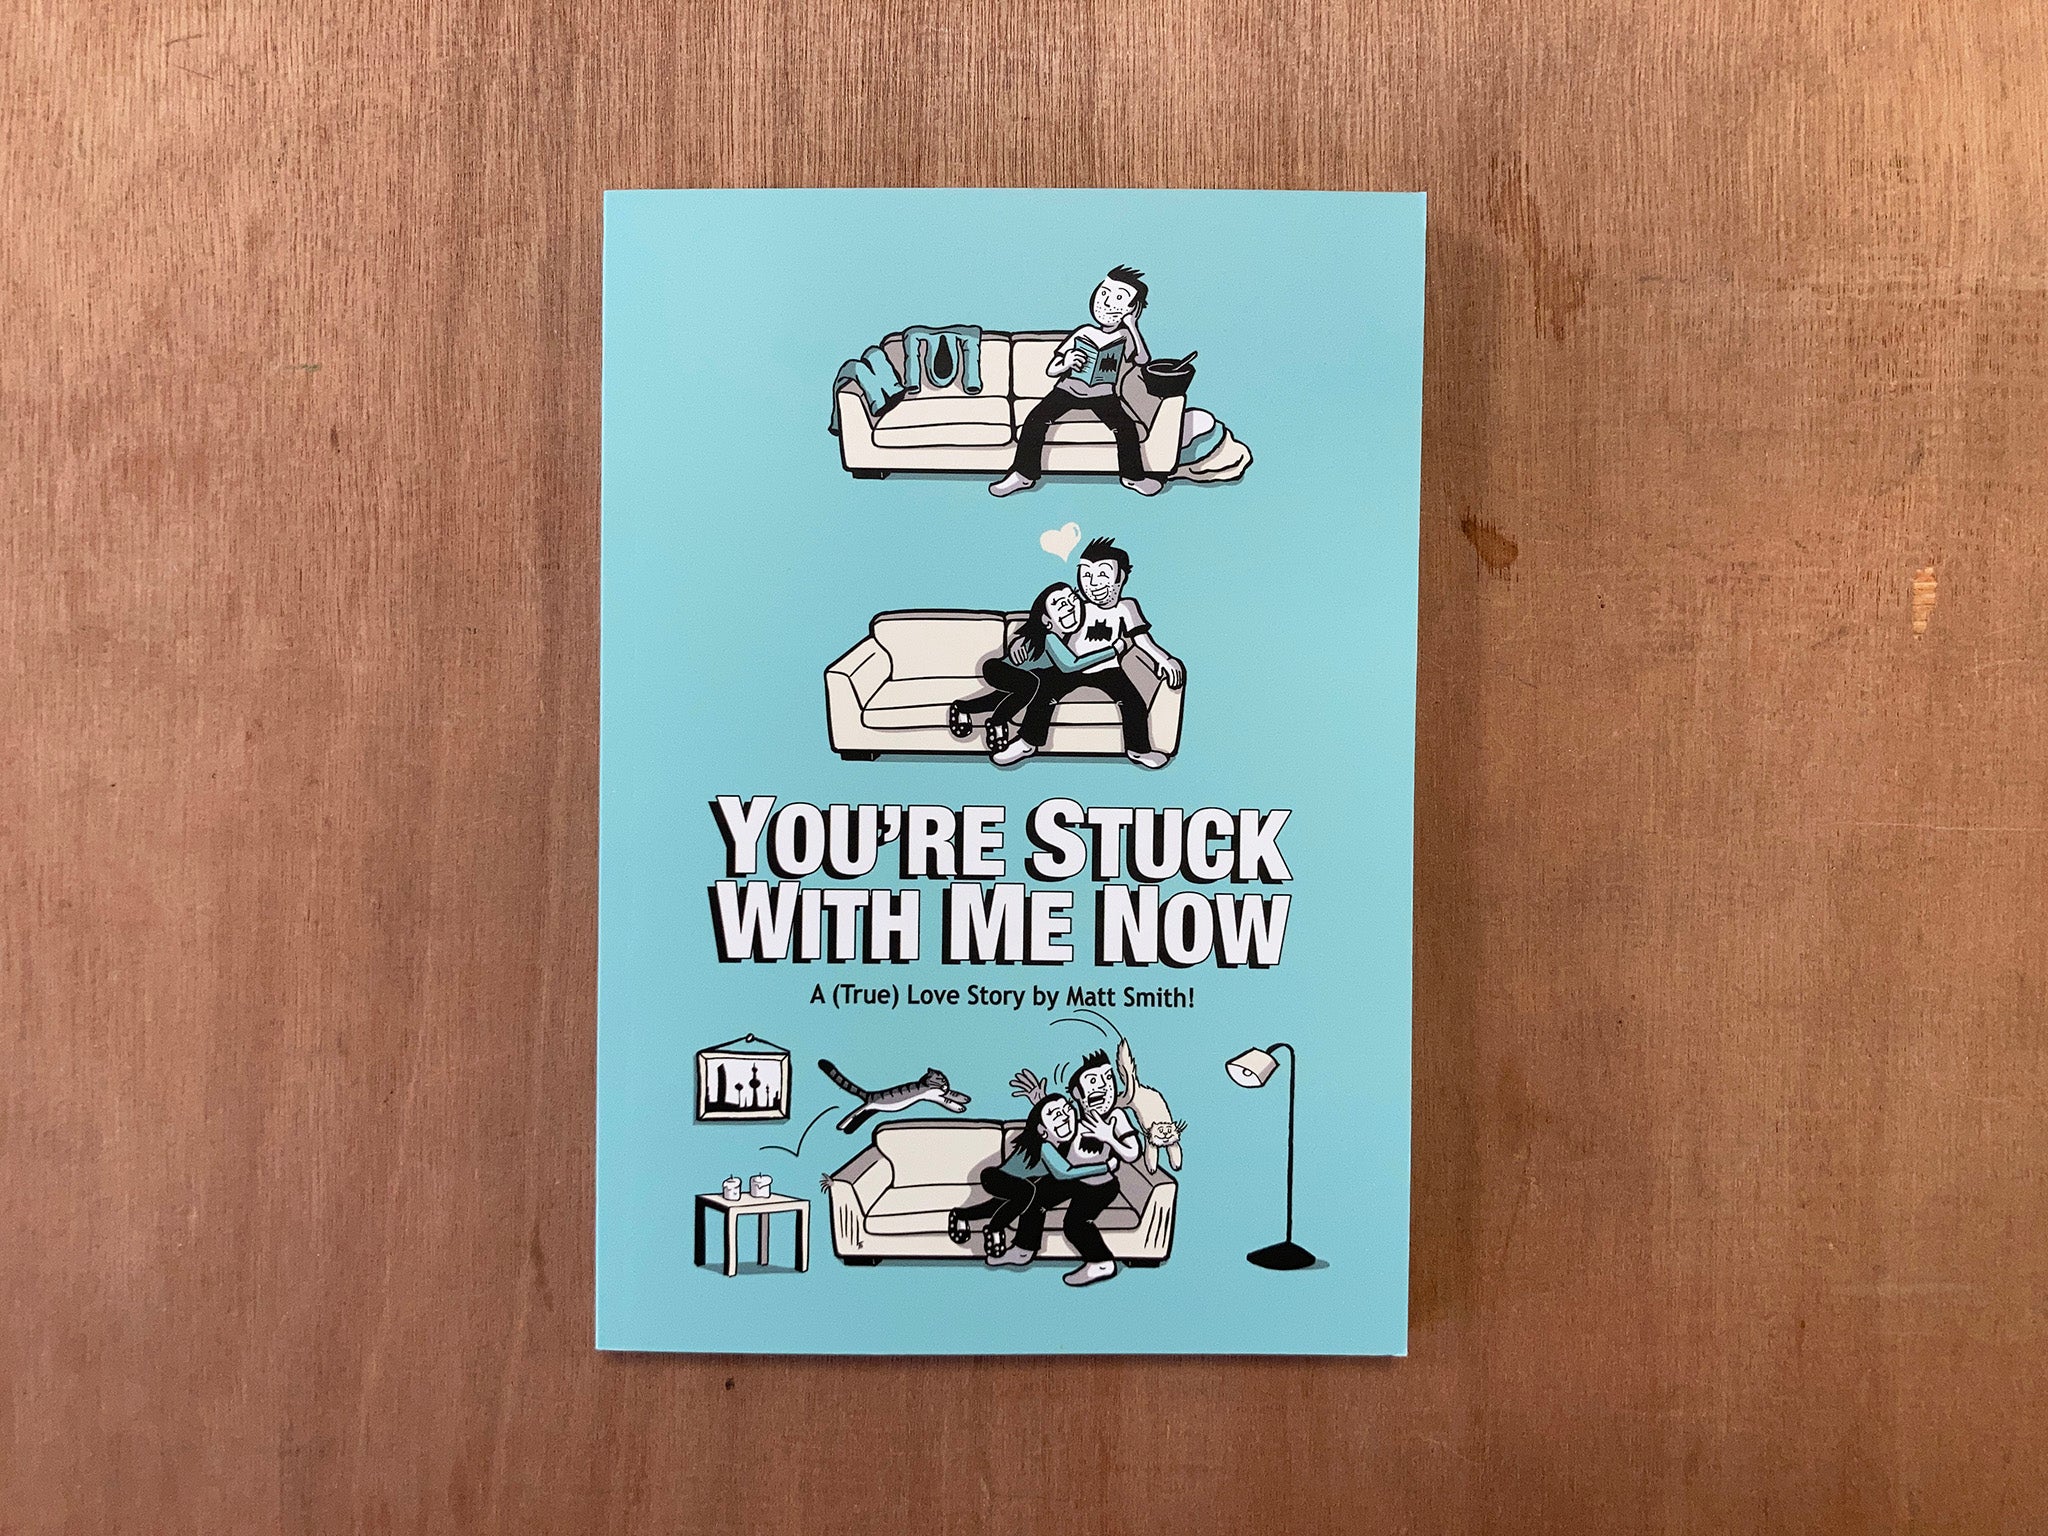 YOU'RE STUCK WITH ME NOW by Matt Smith